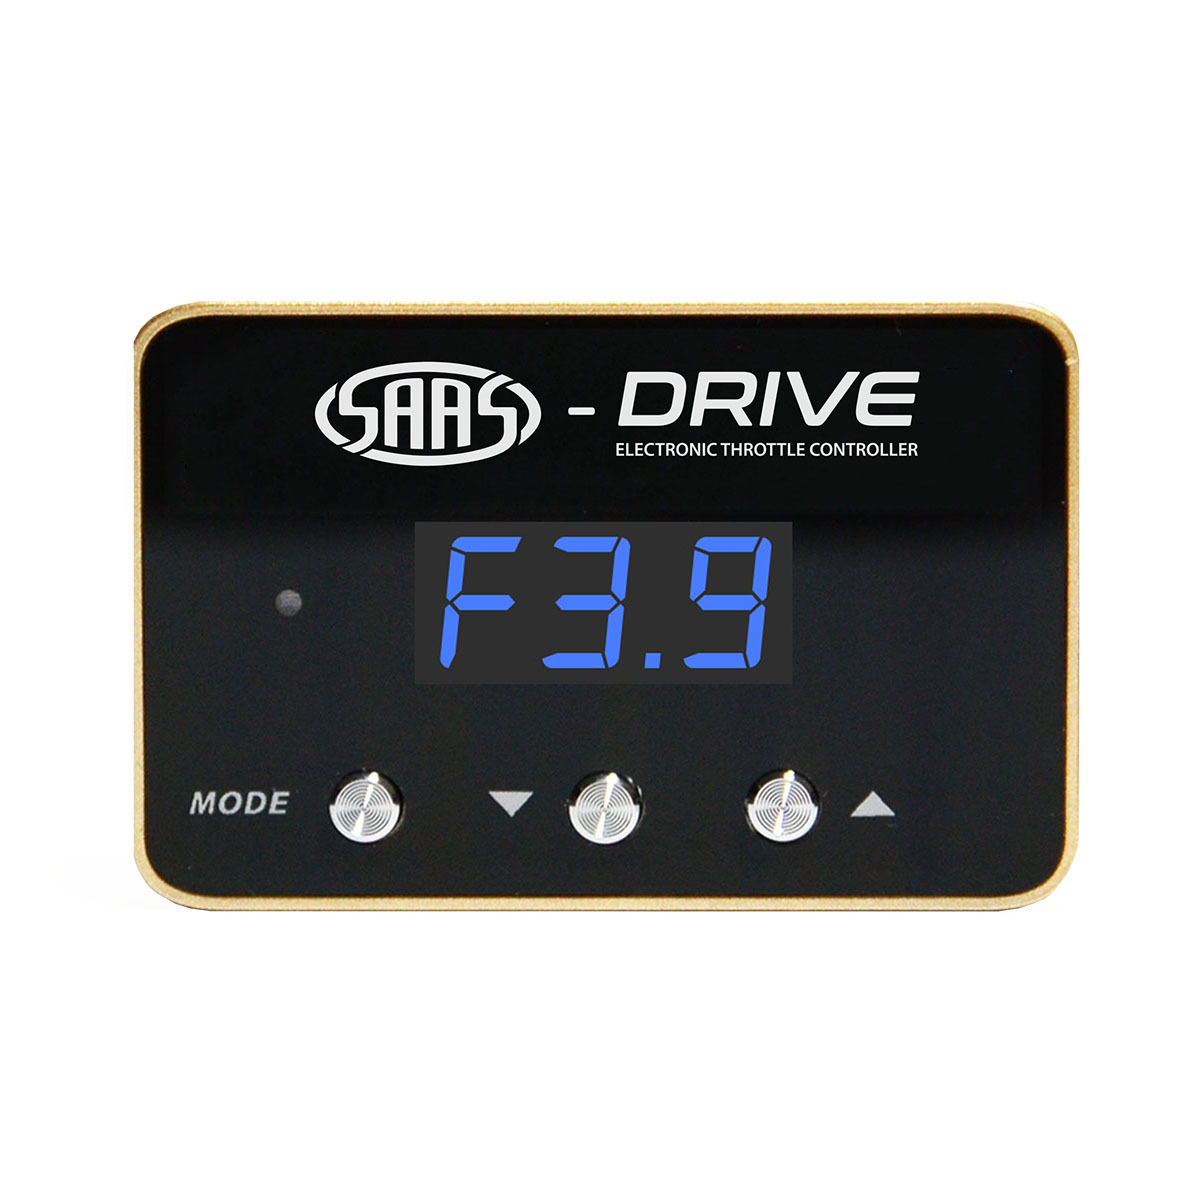 SAAS-Drive Audi RS6 C7 Typ 4G 2013 - 2018 Throttle Controller 